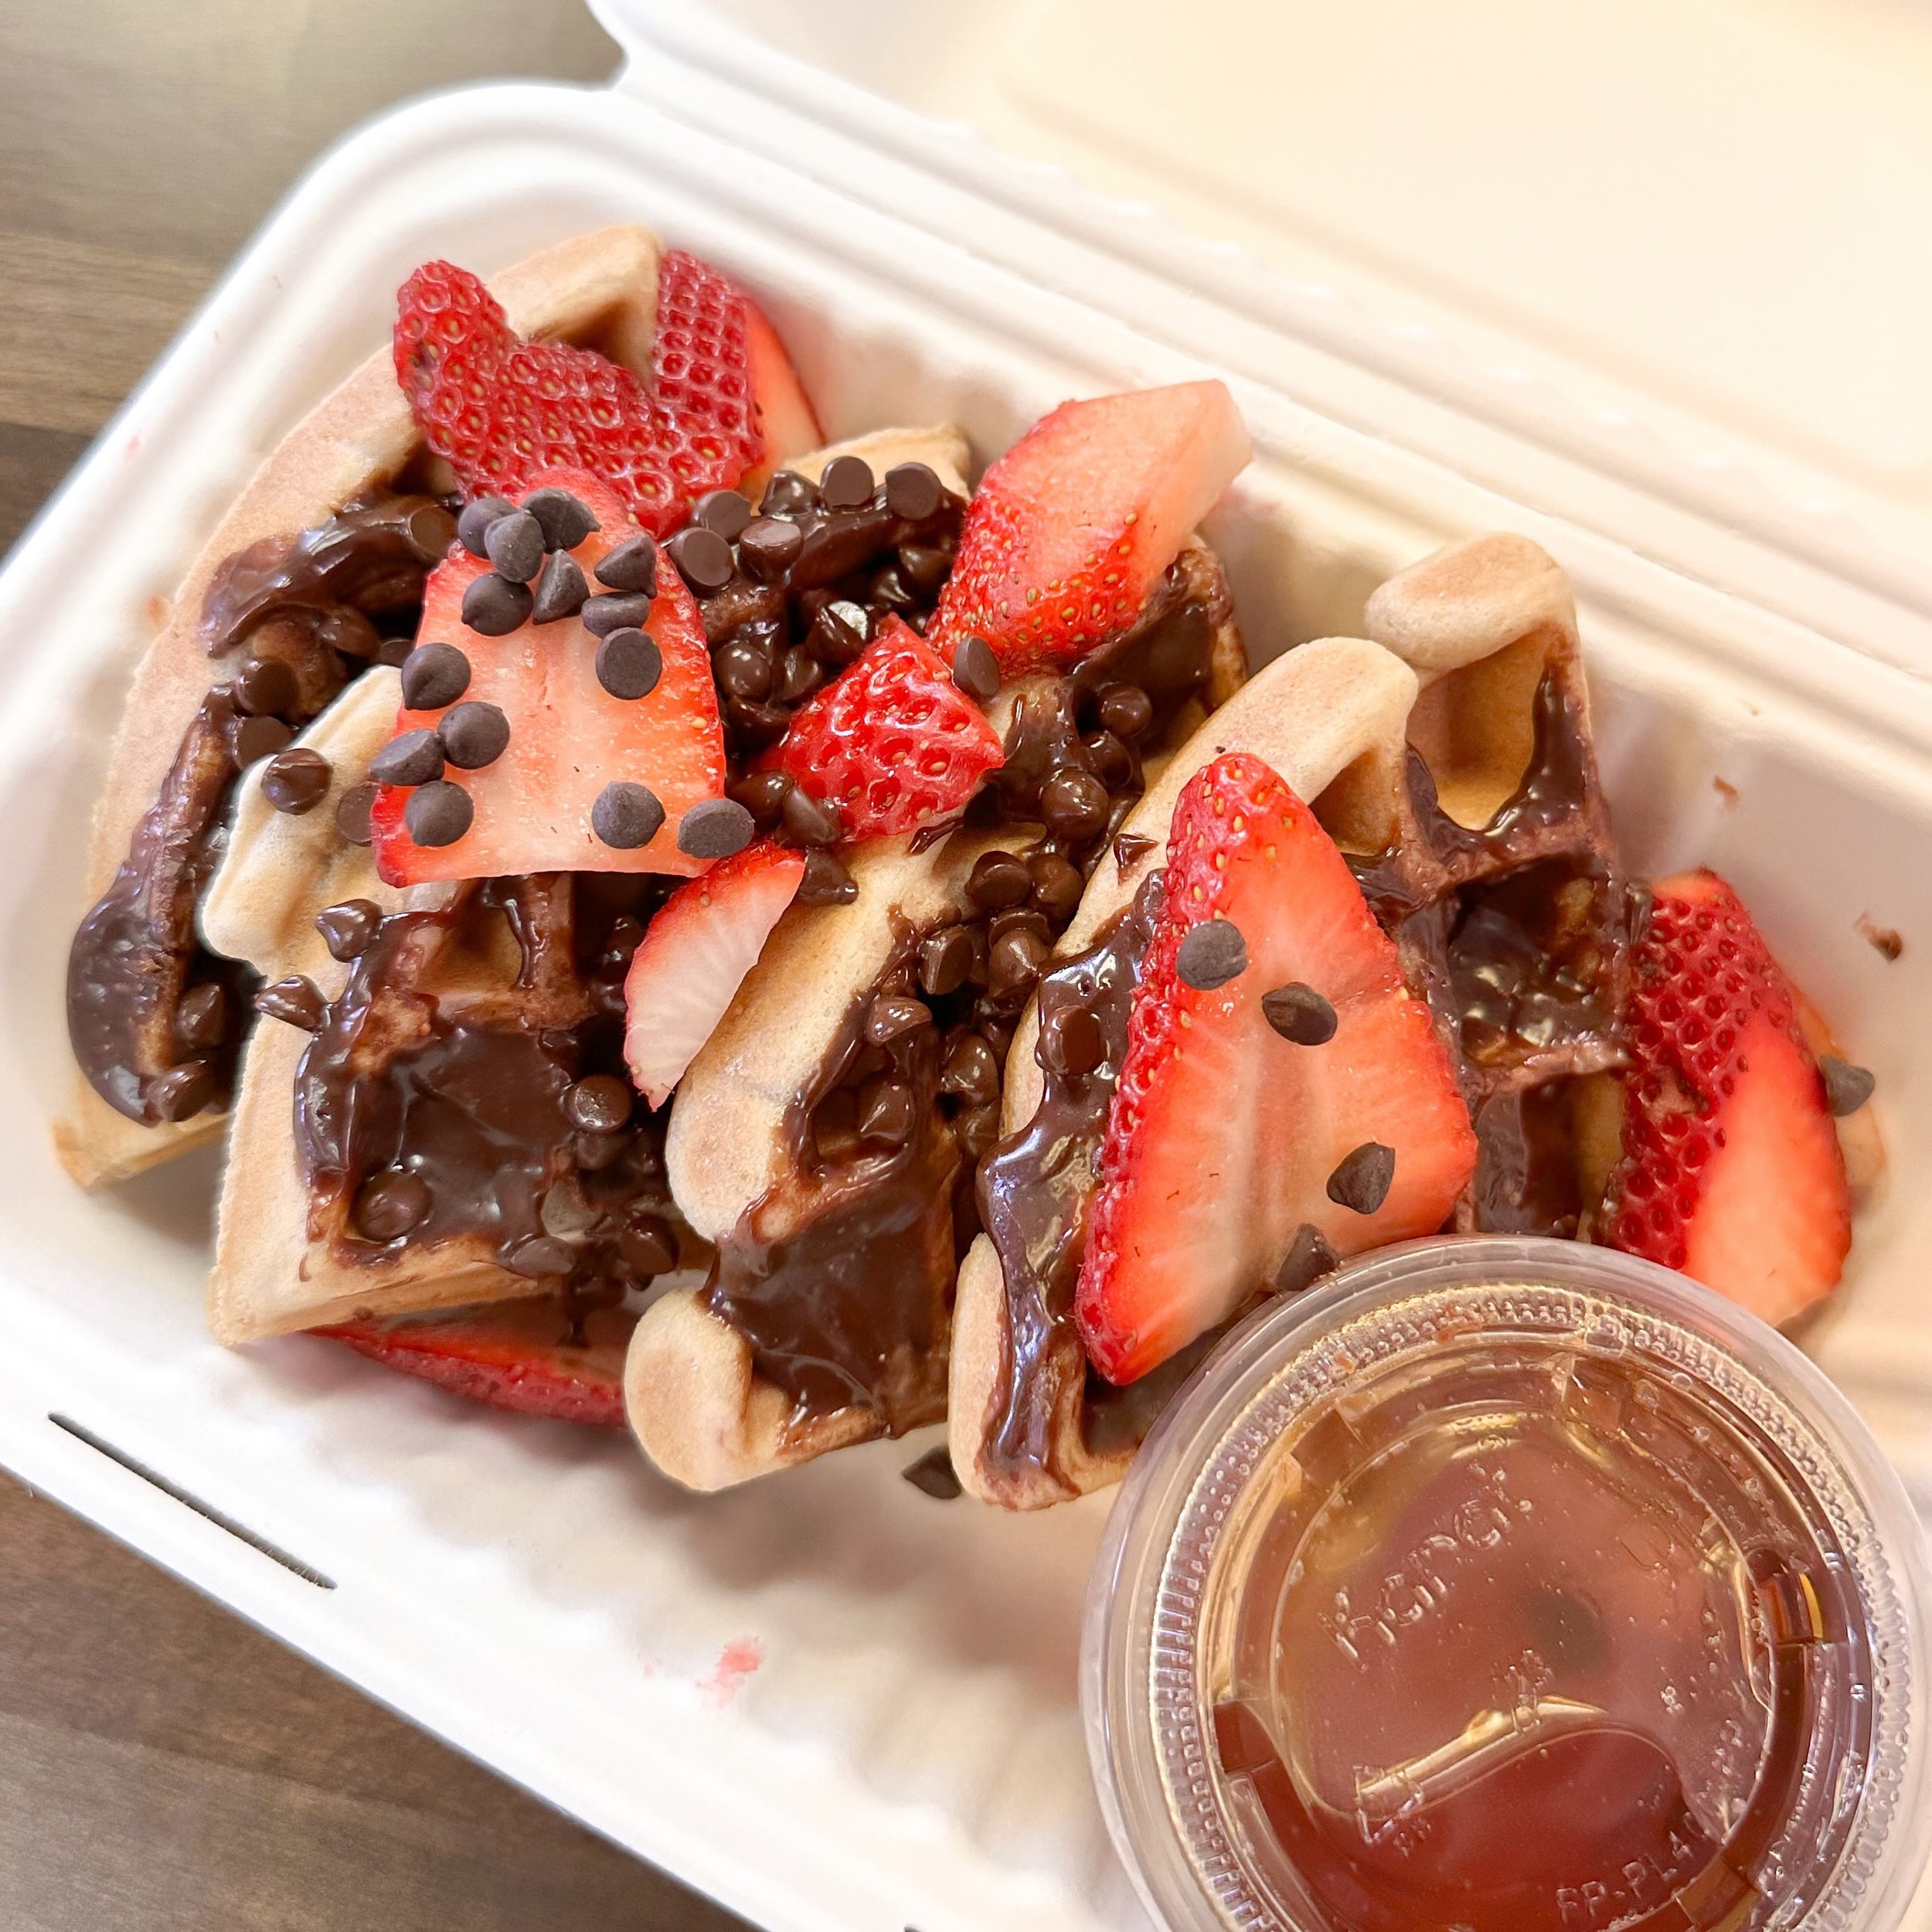 say hello to chocolate strawberry waffles 🤤

made with gluten free + vegan waffle topped with maple syrup, strawberries, chocolate spread (organic hazelnuts, organic coconut sugar, organic cacao bean, organic cacao powder, organic vanilla, sea salt)